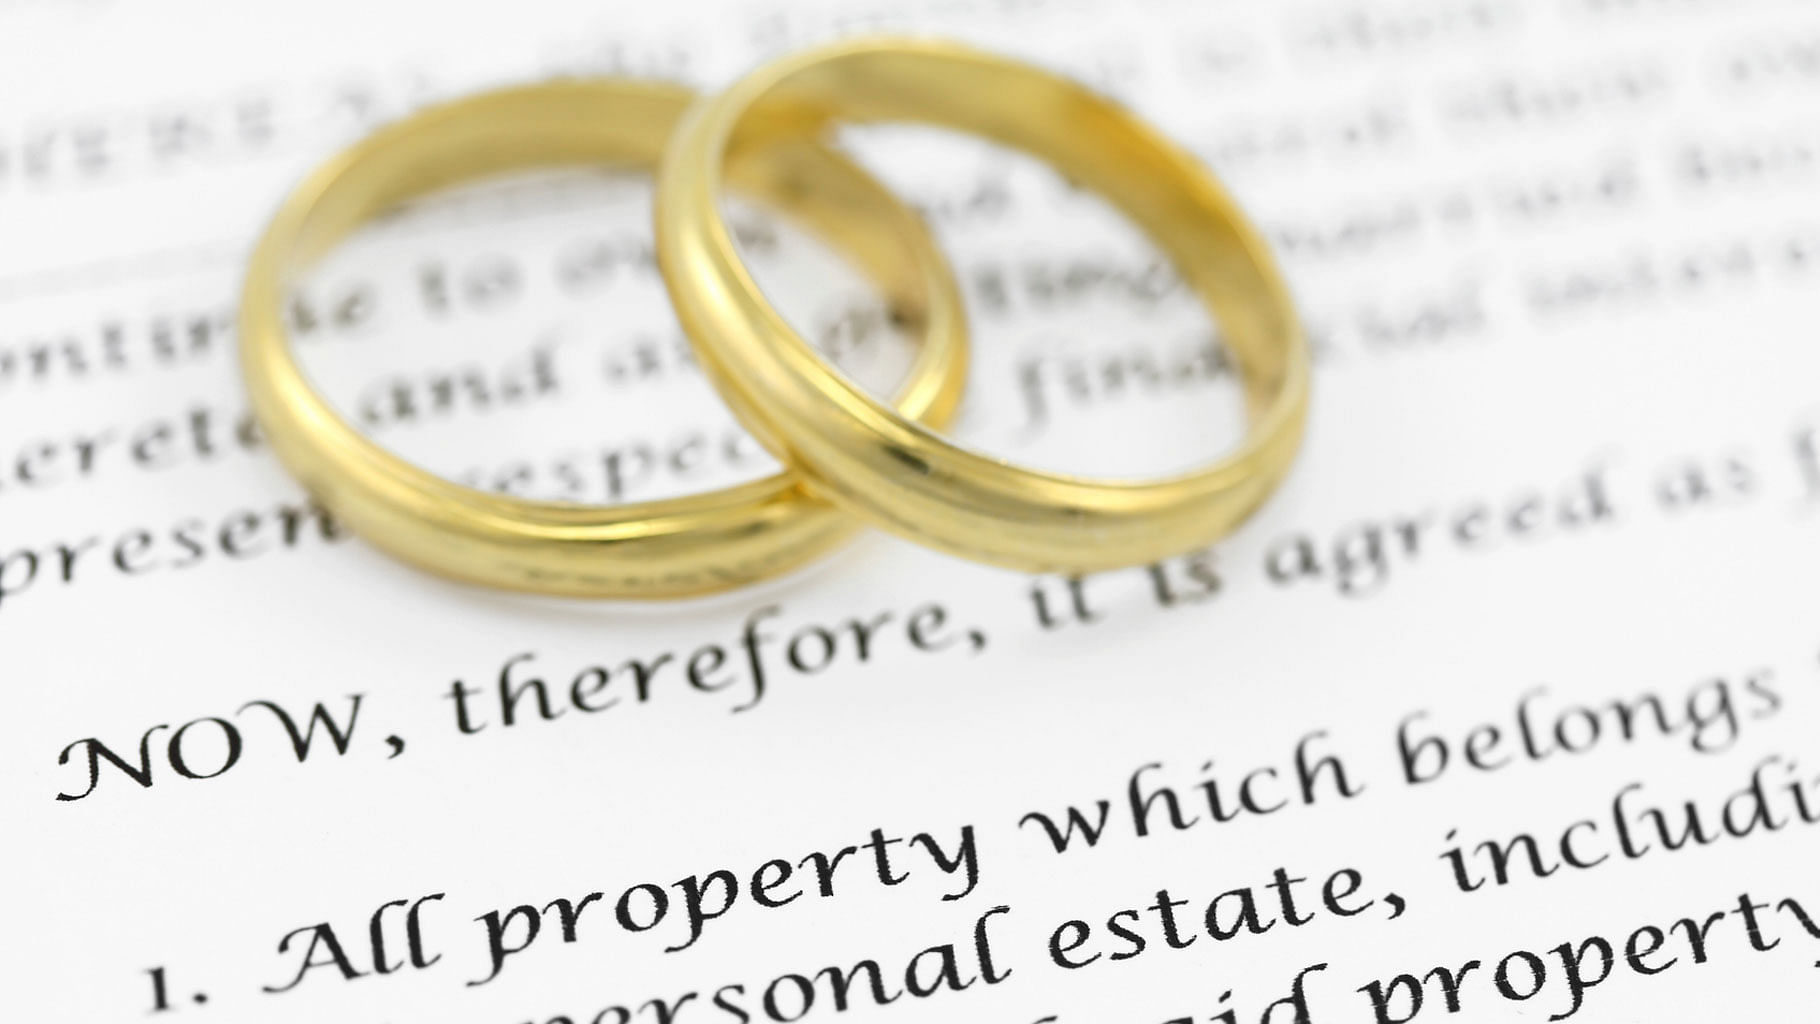 A prenuptial agreement eases the lives of both men and women in case a marriage does not work out. (Photo: iStock photos)